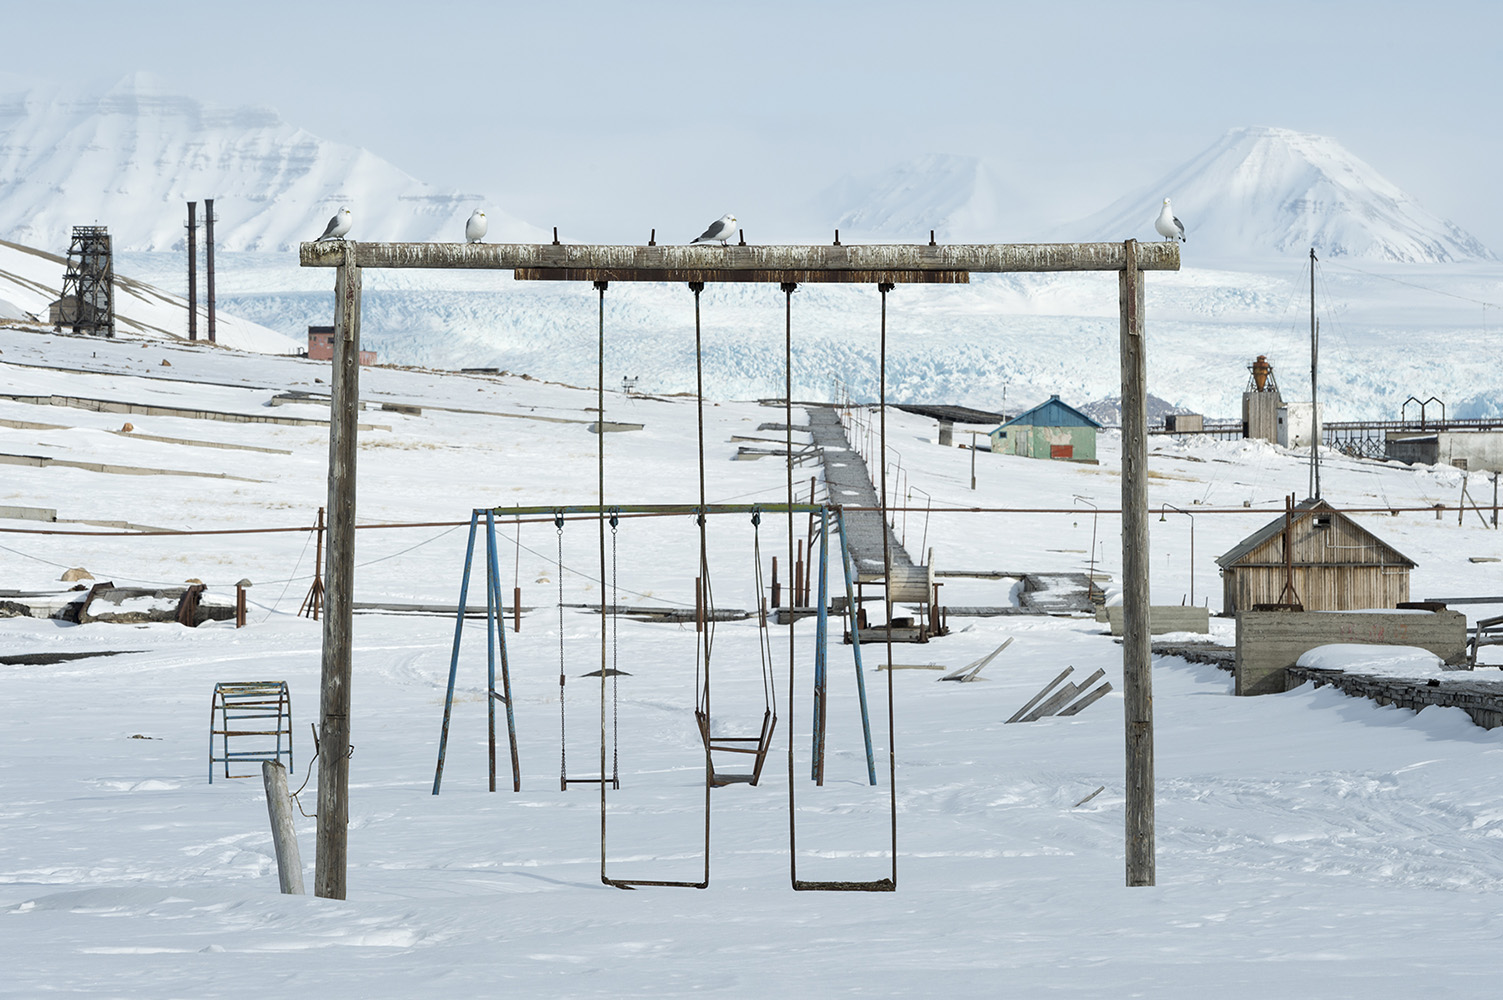 Birds sitting on the swing in the deserted playground at Pyramiden.Pyramiden is a Russian settlement and coal mining community on the archipelago of Svalbard, Norway. Founded by Sweden in 1910 and sold to the Soviet Union in 1927, Pyramiden was closed in 1998 and has since remained largely abandoned with most of its infrastructure and buildings still in place.